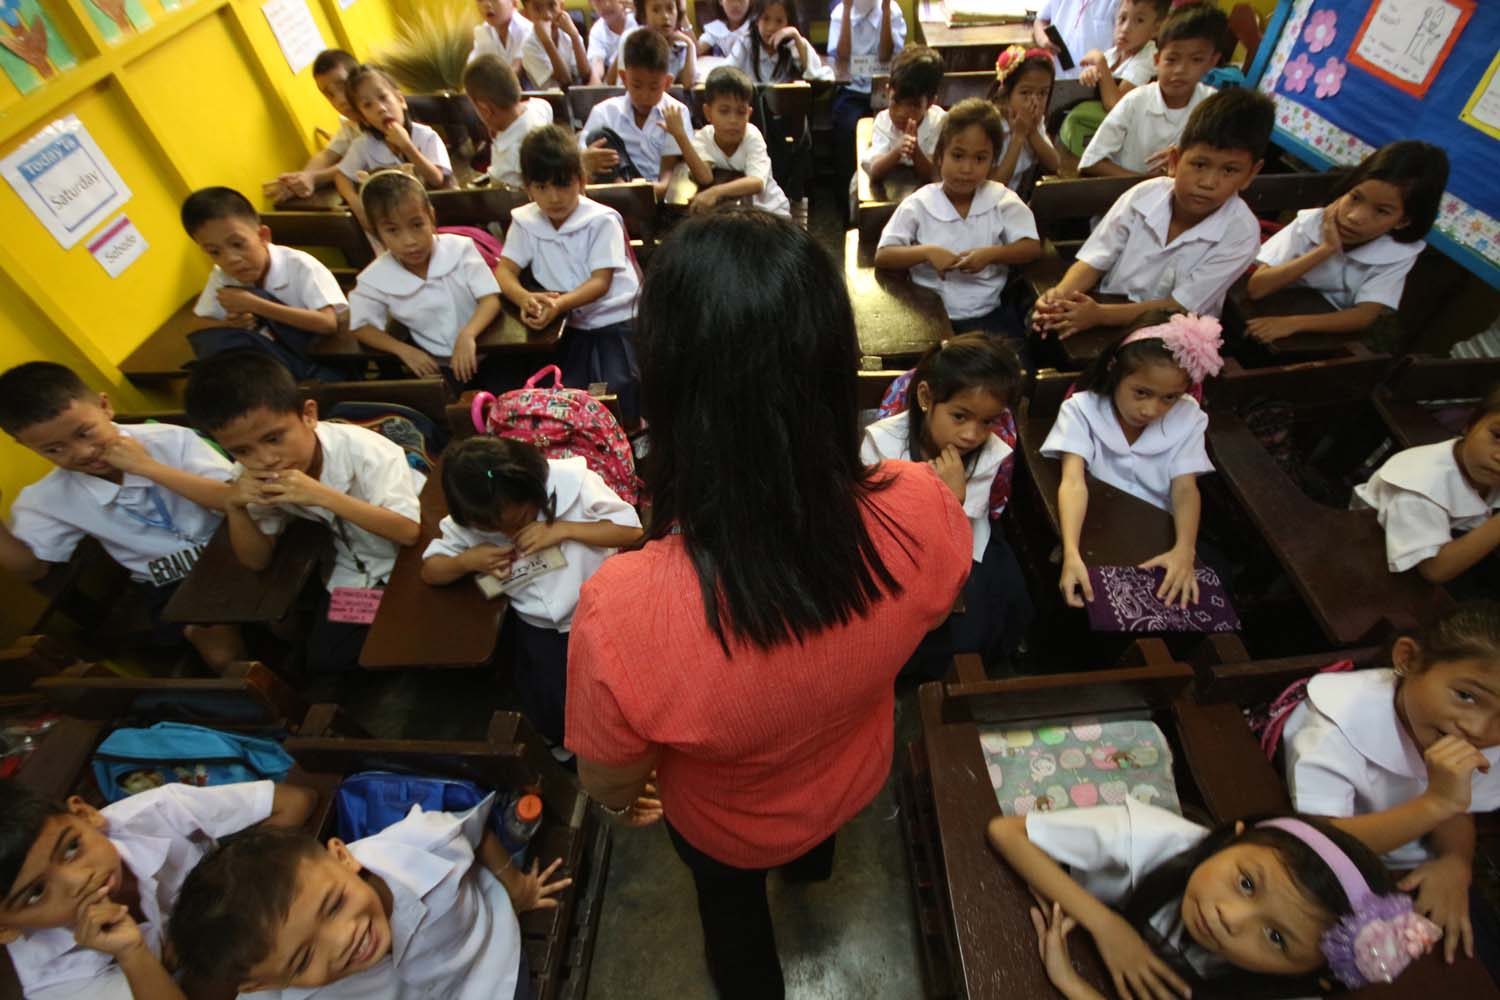 Briones: We need to recognize more teachers